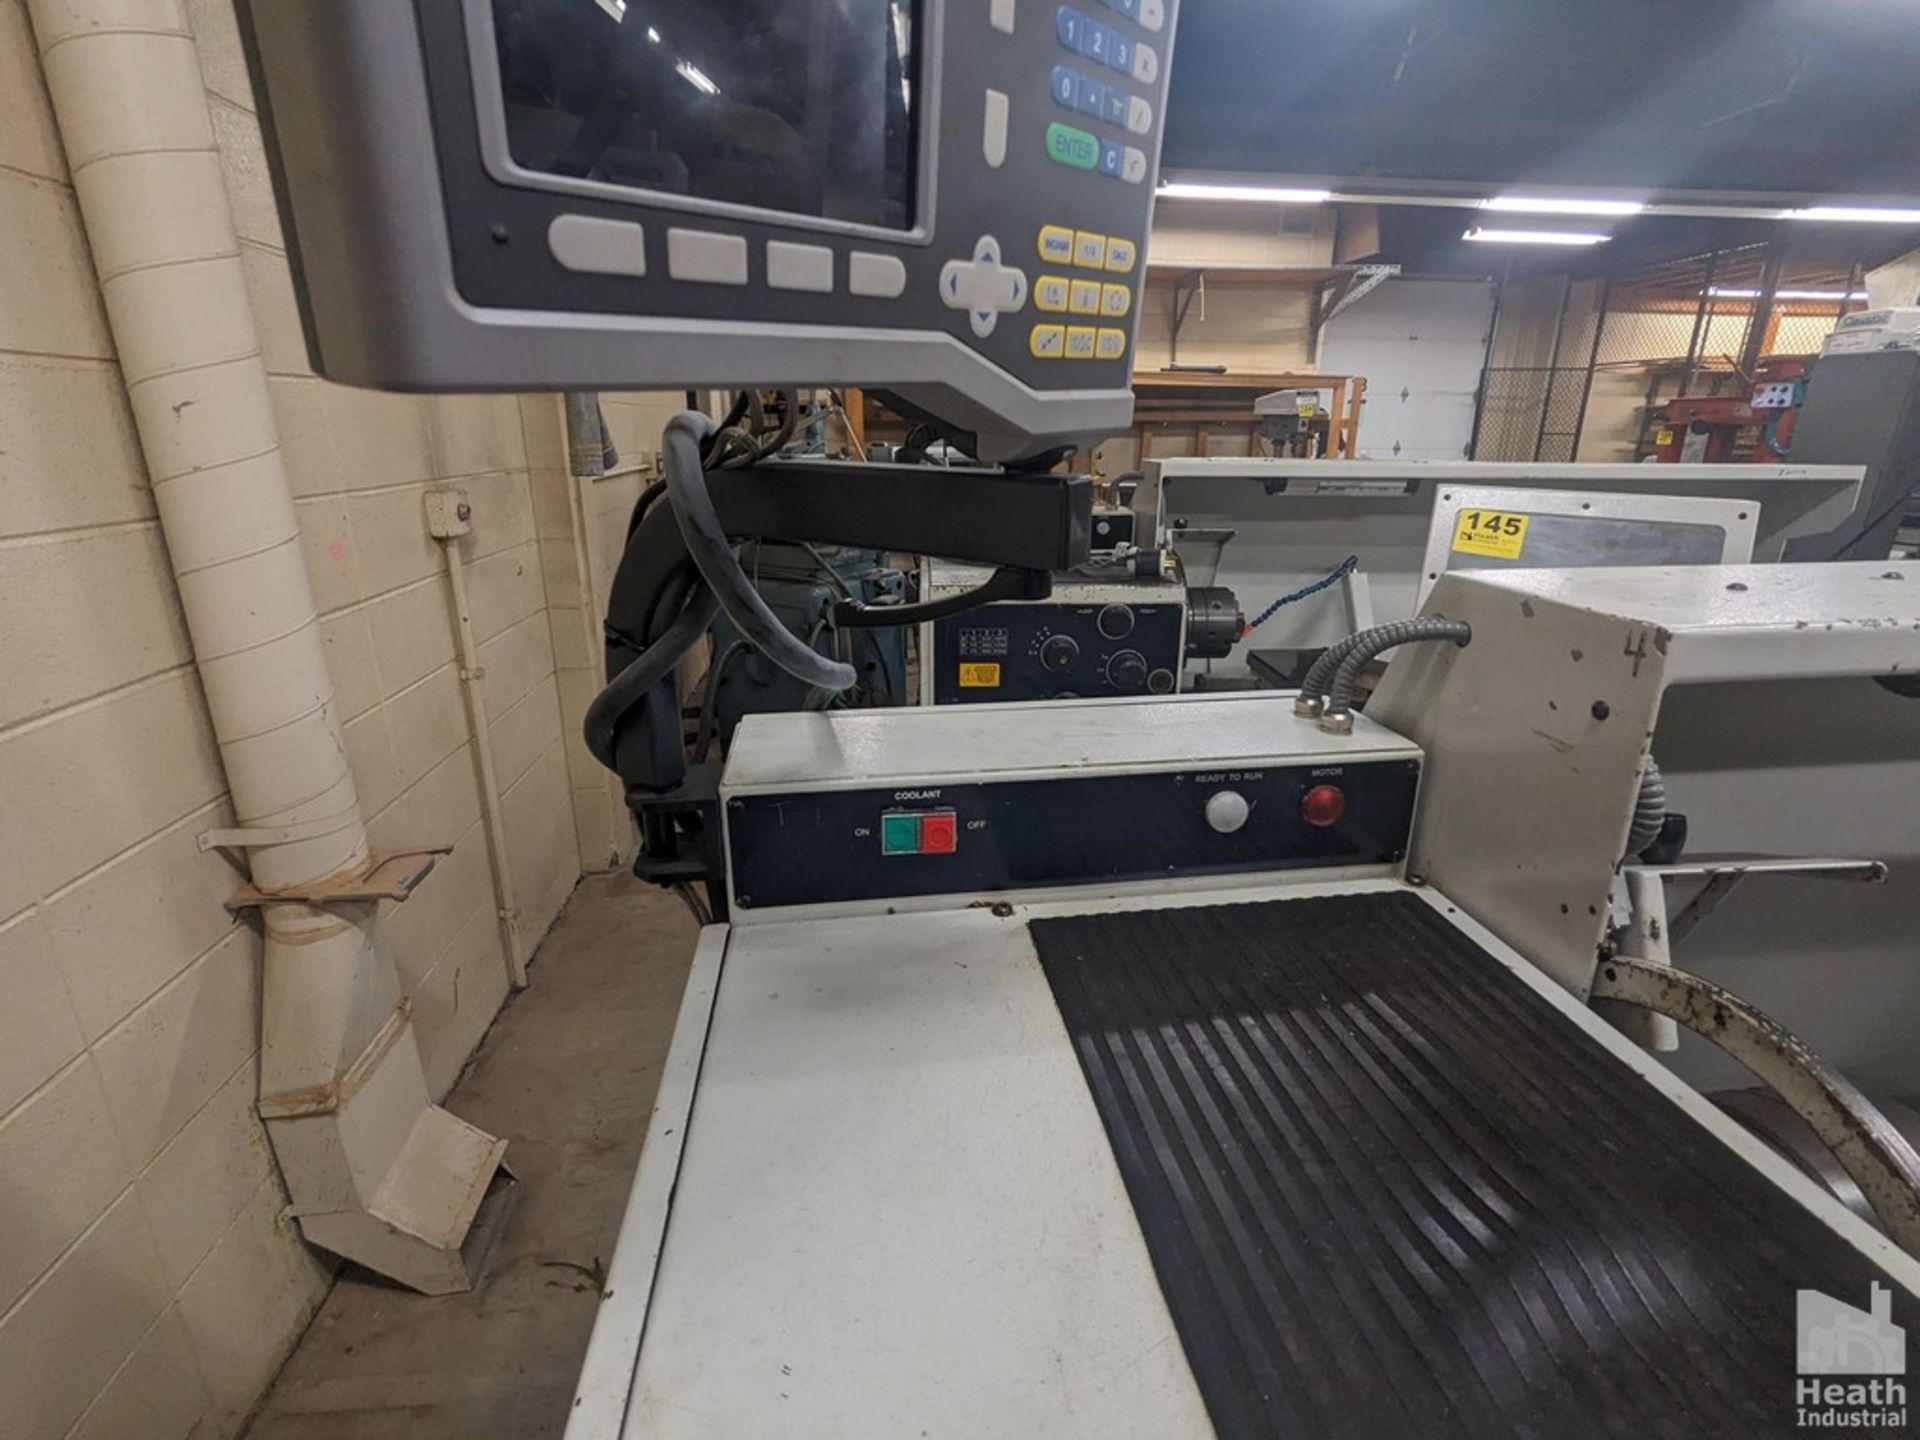 CLAUSING-METOSA 13"X40" MODEL 1340S TOOLROOM LATHE, S/N 49908. 2500 SPINDLE RPM, WITH 6" 3-JAW - Image 3 of 8